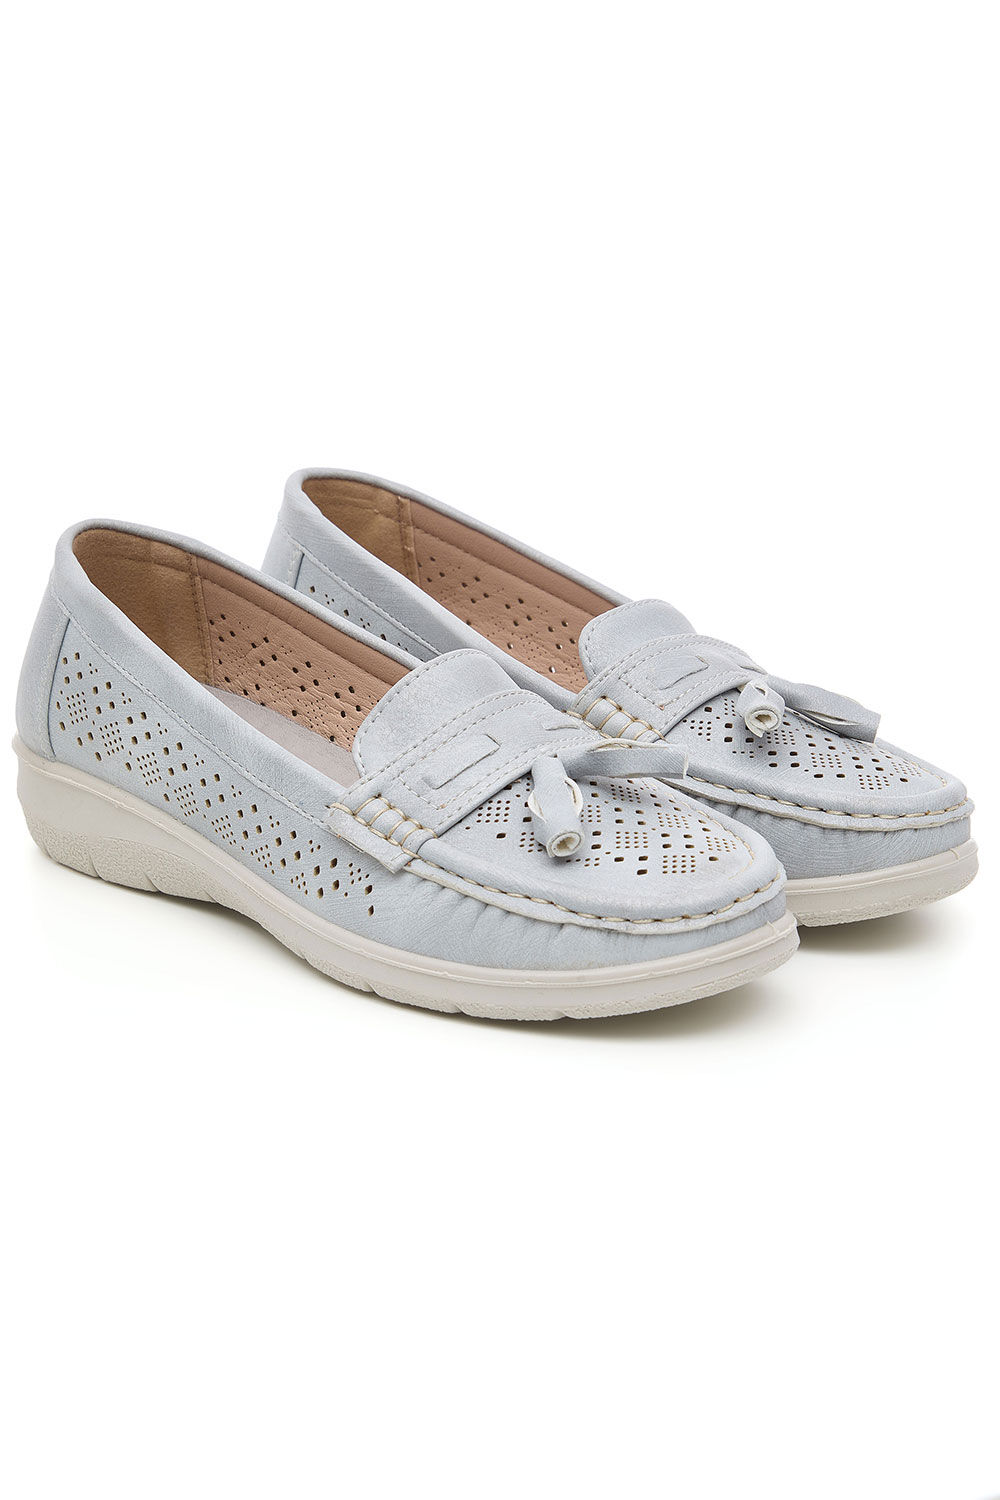 Bonmarche Grey Moccasin Shoes With Cutout and Tassle Detail, Size: 7 - Summer Dresses